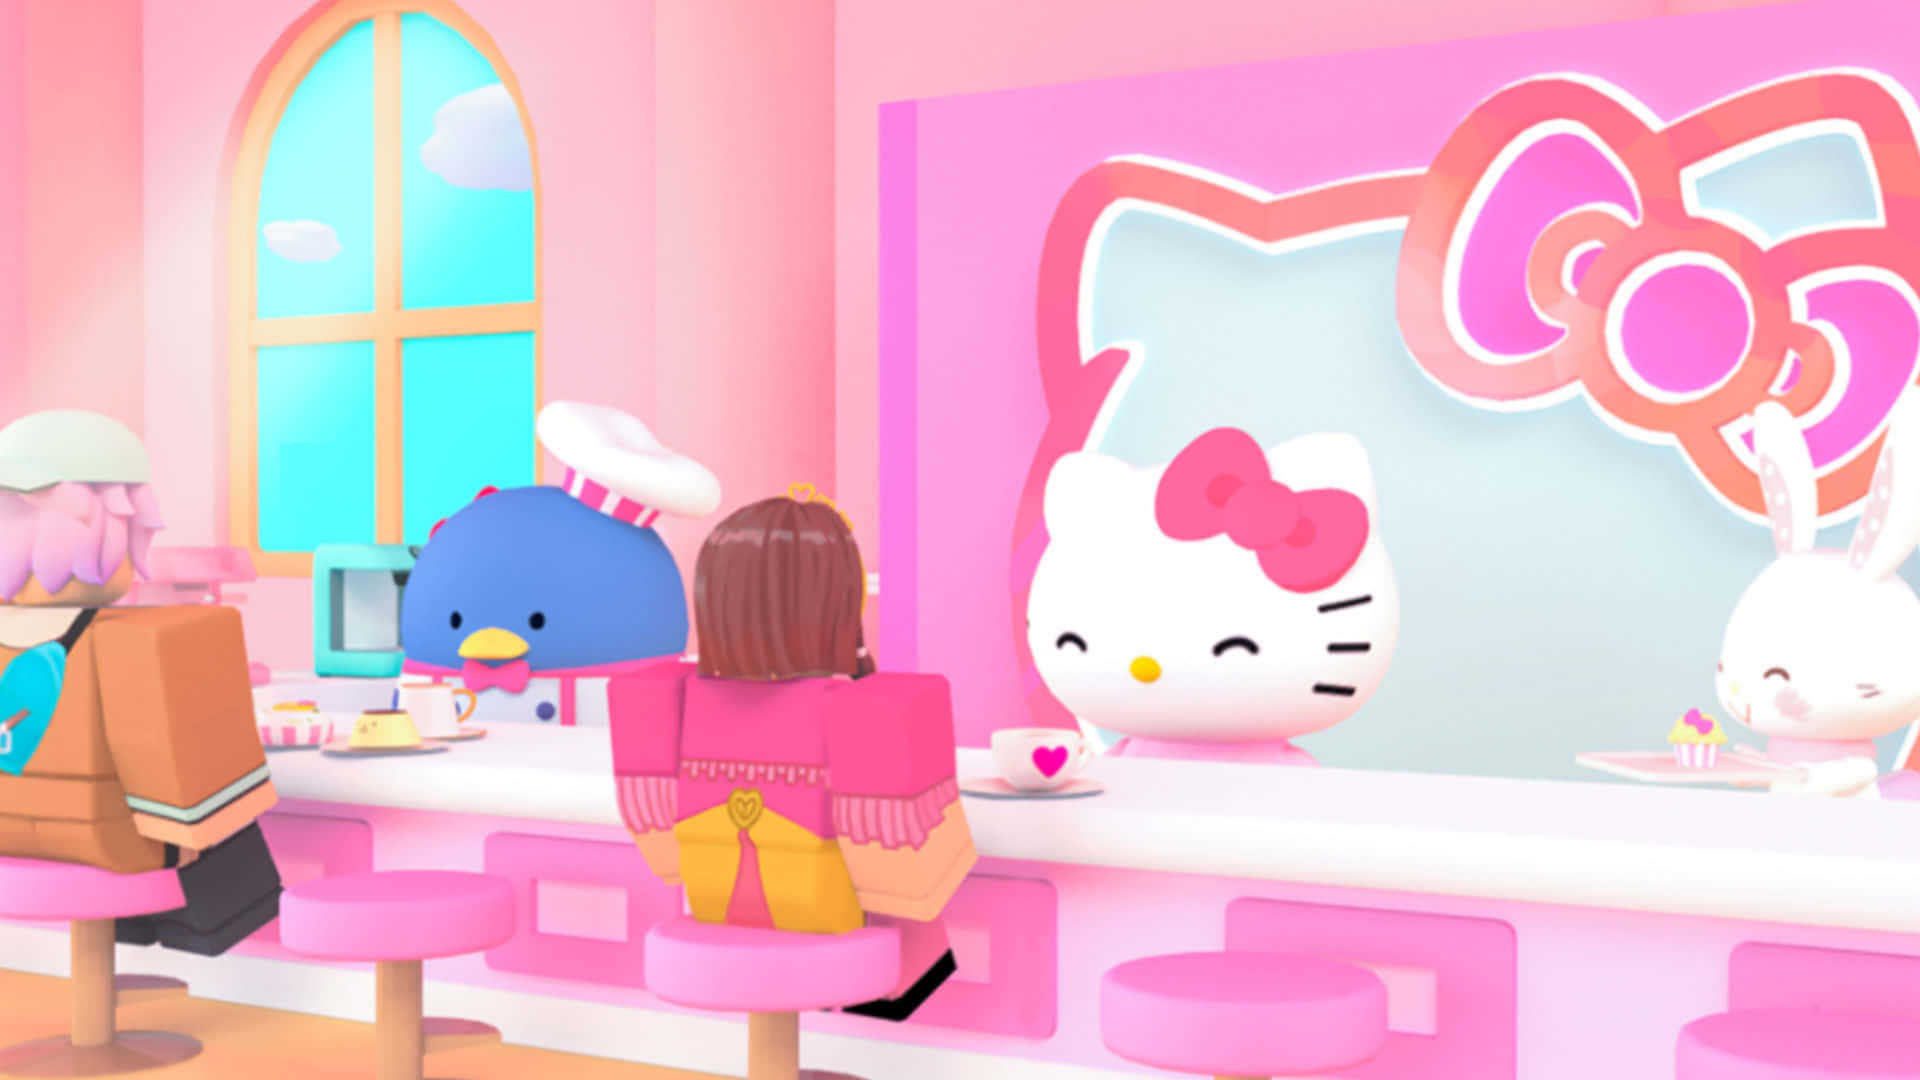 Download Charmingly Cute Hello Kitty In Kawaii Style Wallpaper